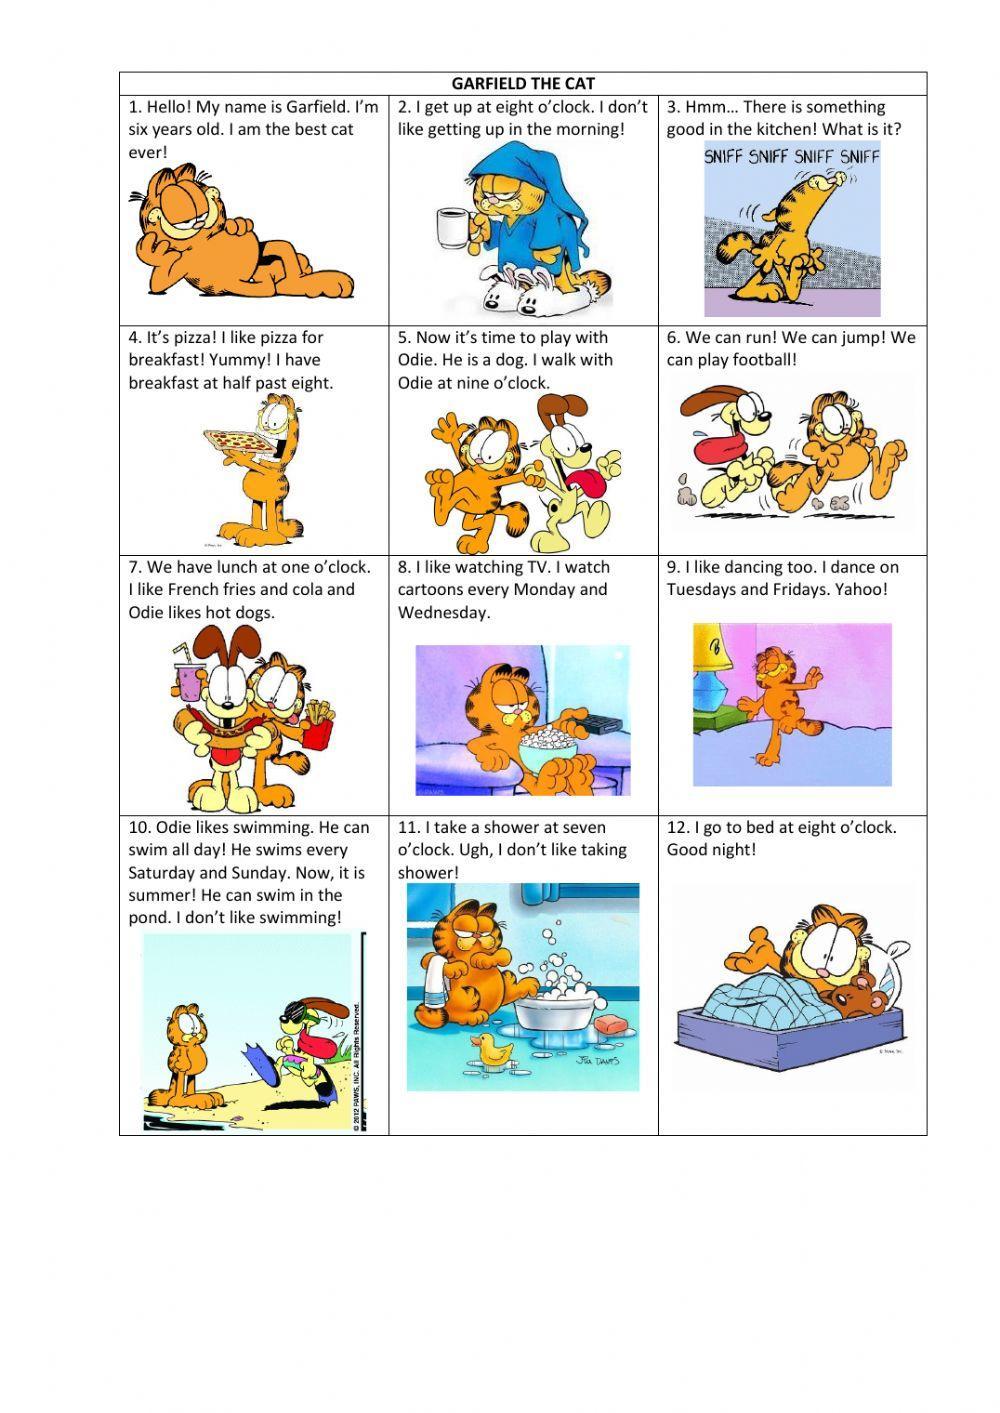 Garfield's daily routines